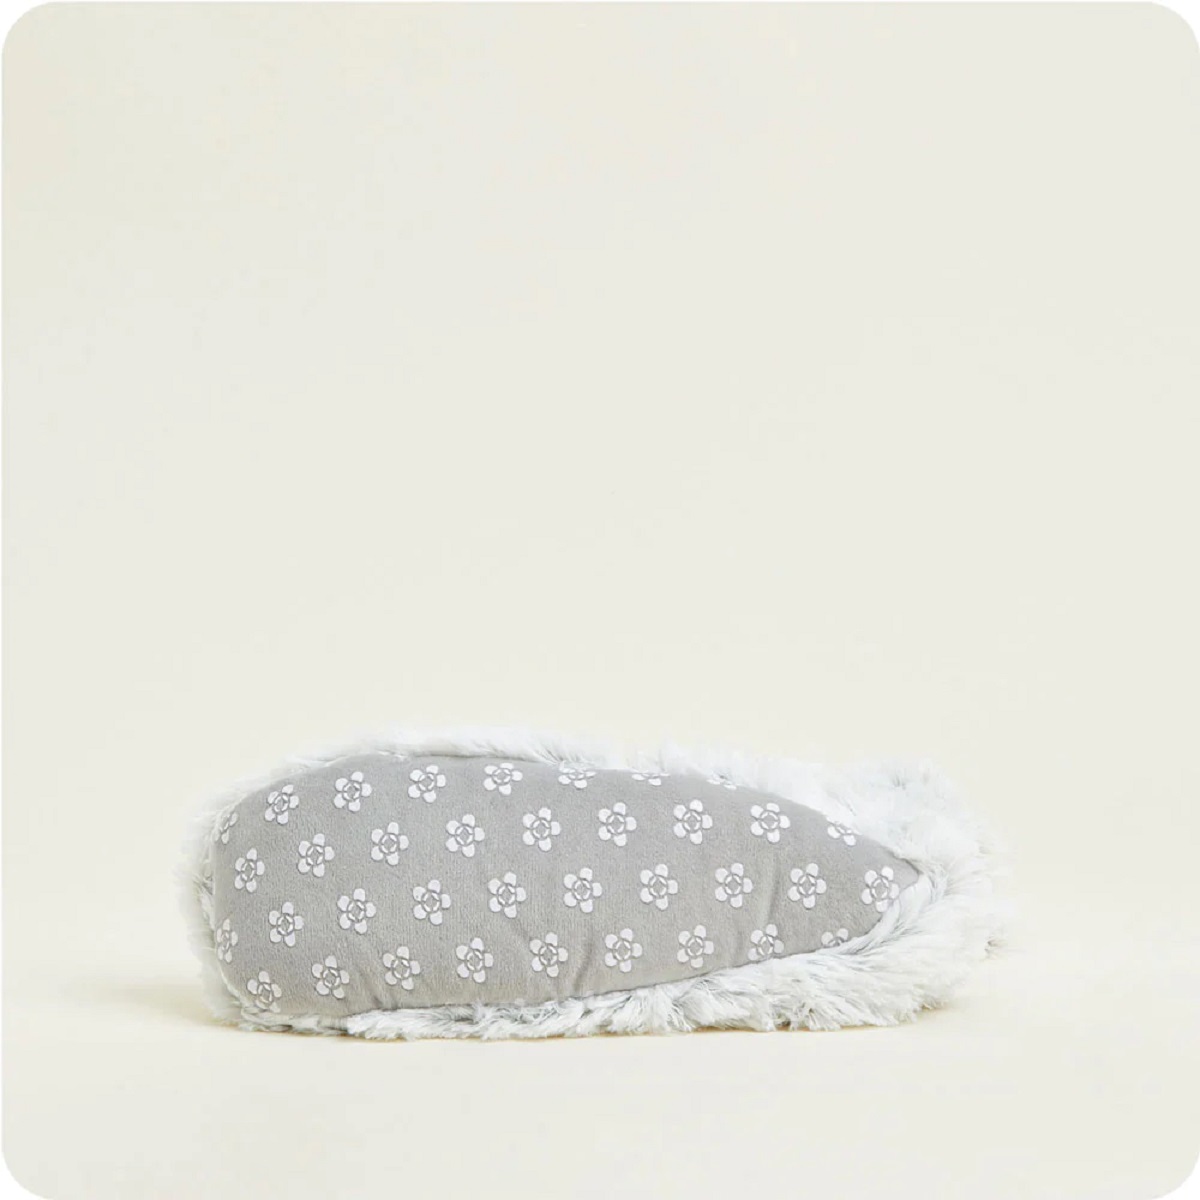 Warmies Plush Microwavable Lavender Scented Boots Gray